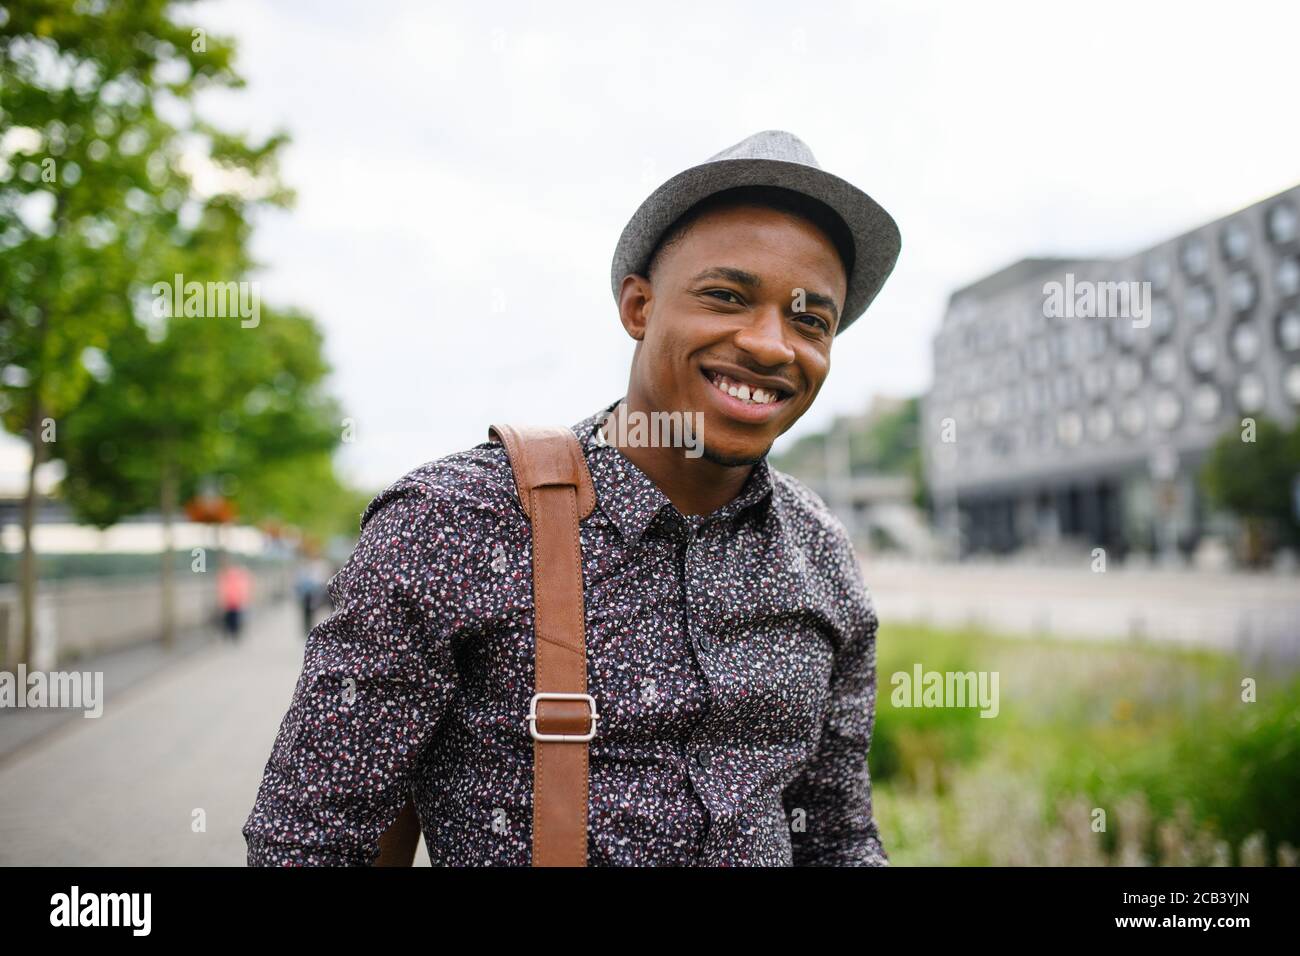 Cheerful young black man commuter outdoors in city, walking. Stock Photo